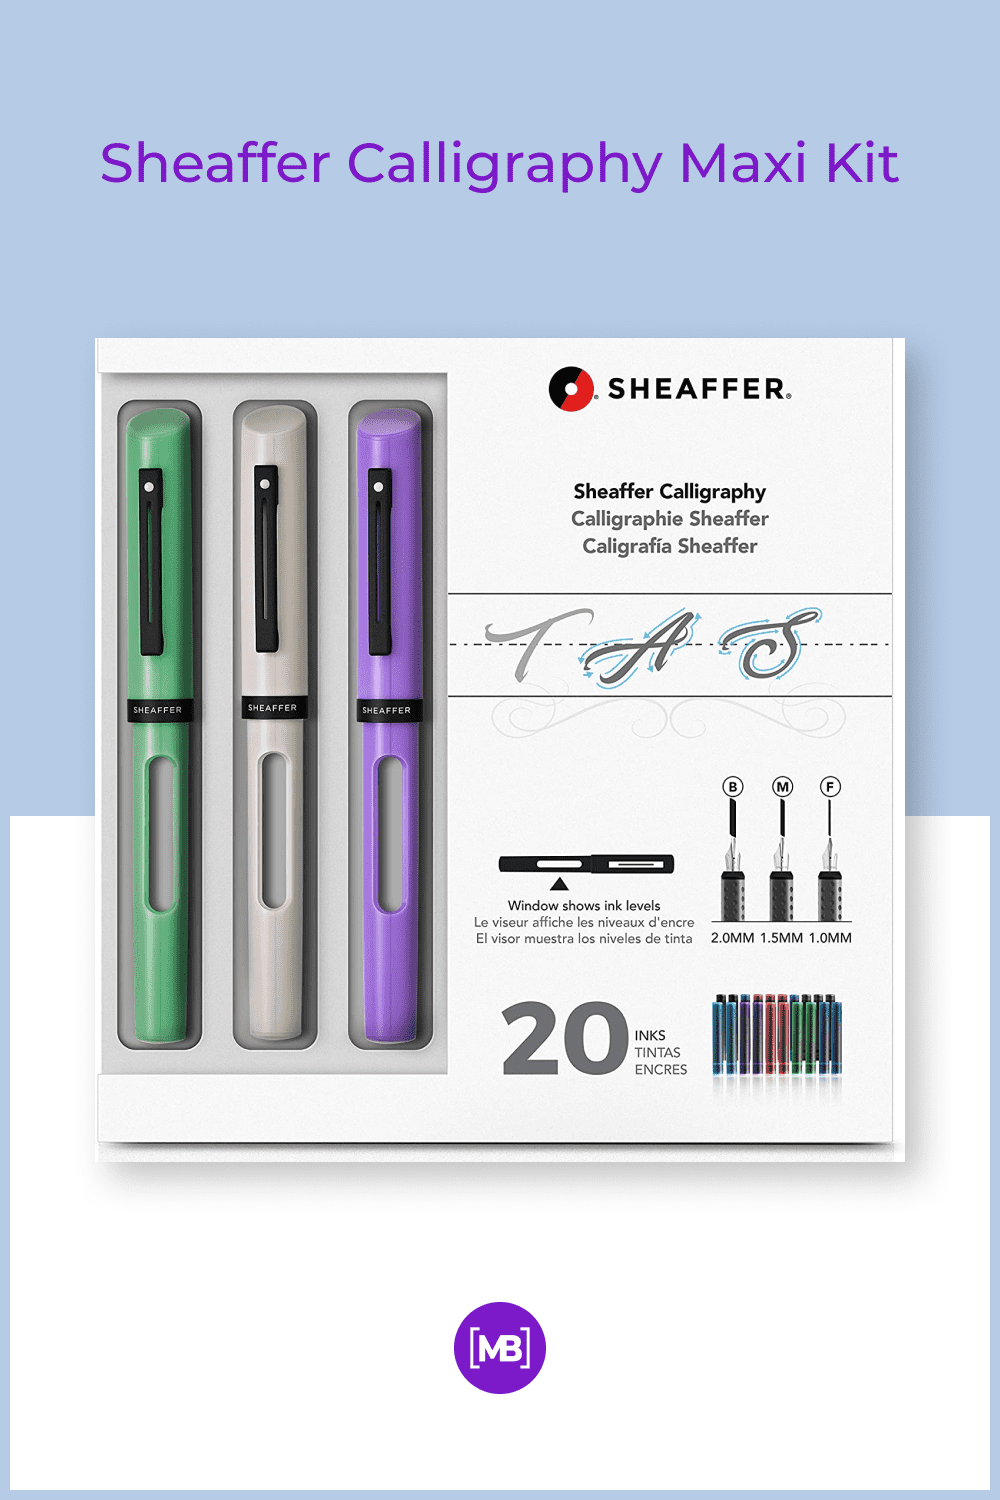 Three modern calligraphy pens with glossy resin finishes in neo-mint, white, and lavender.